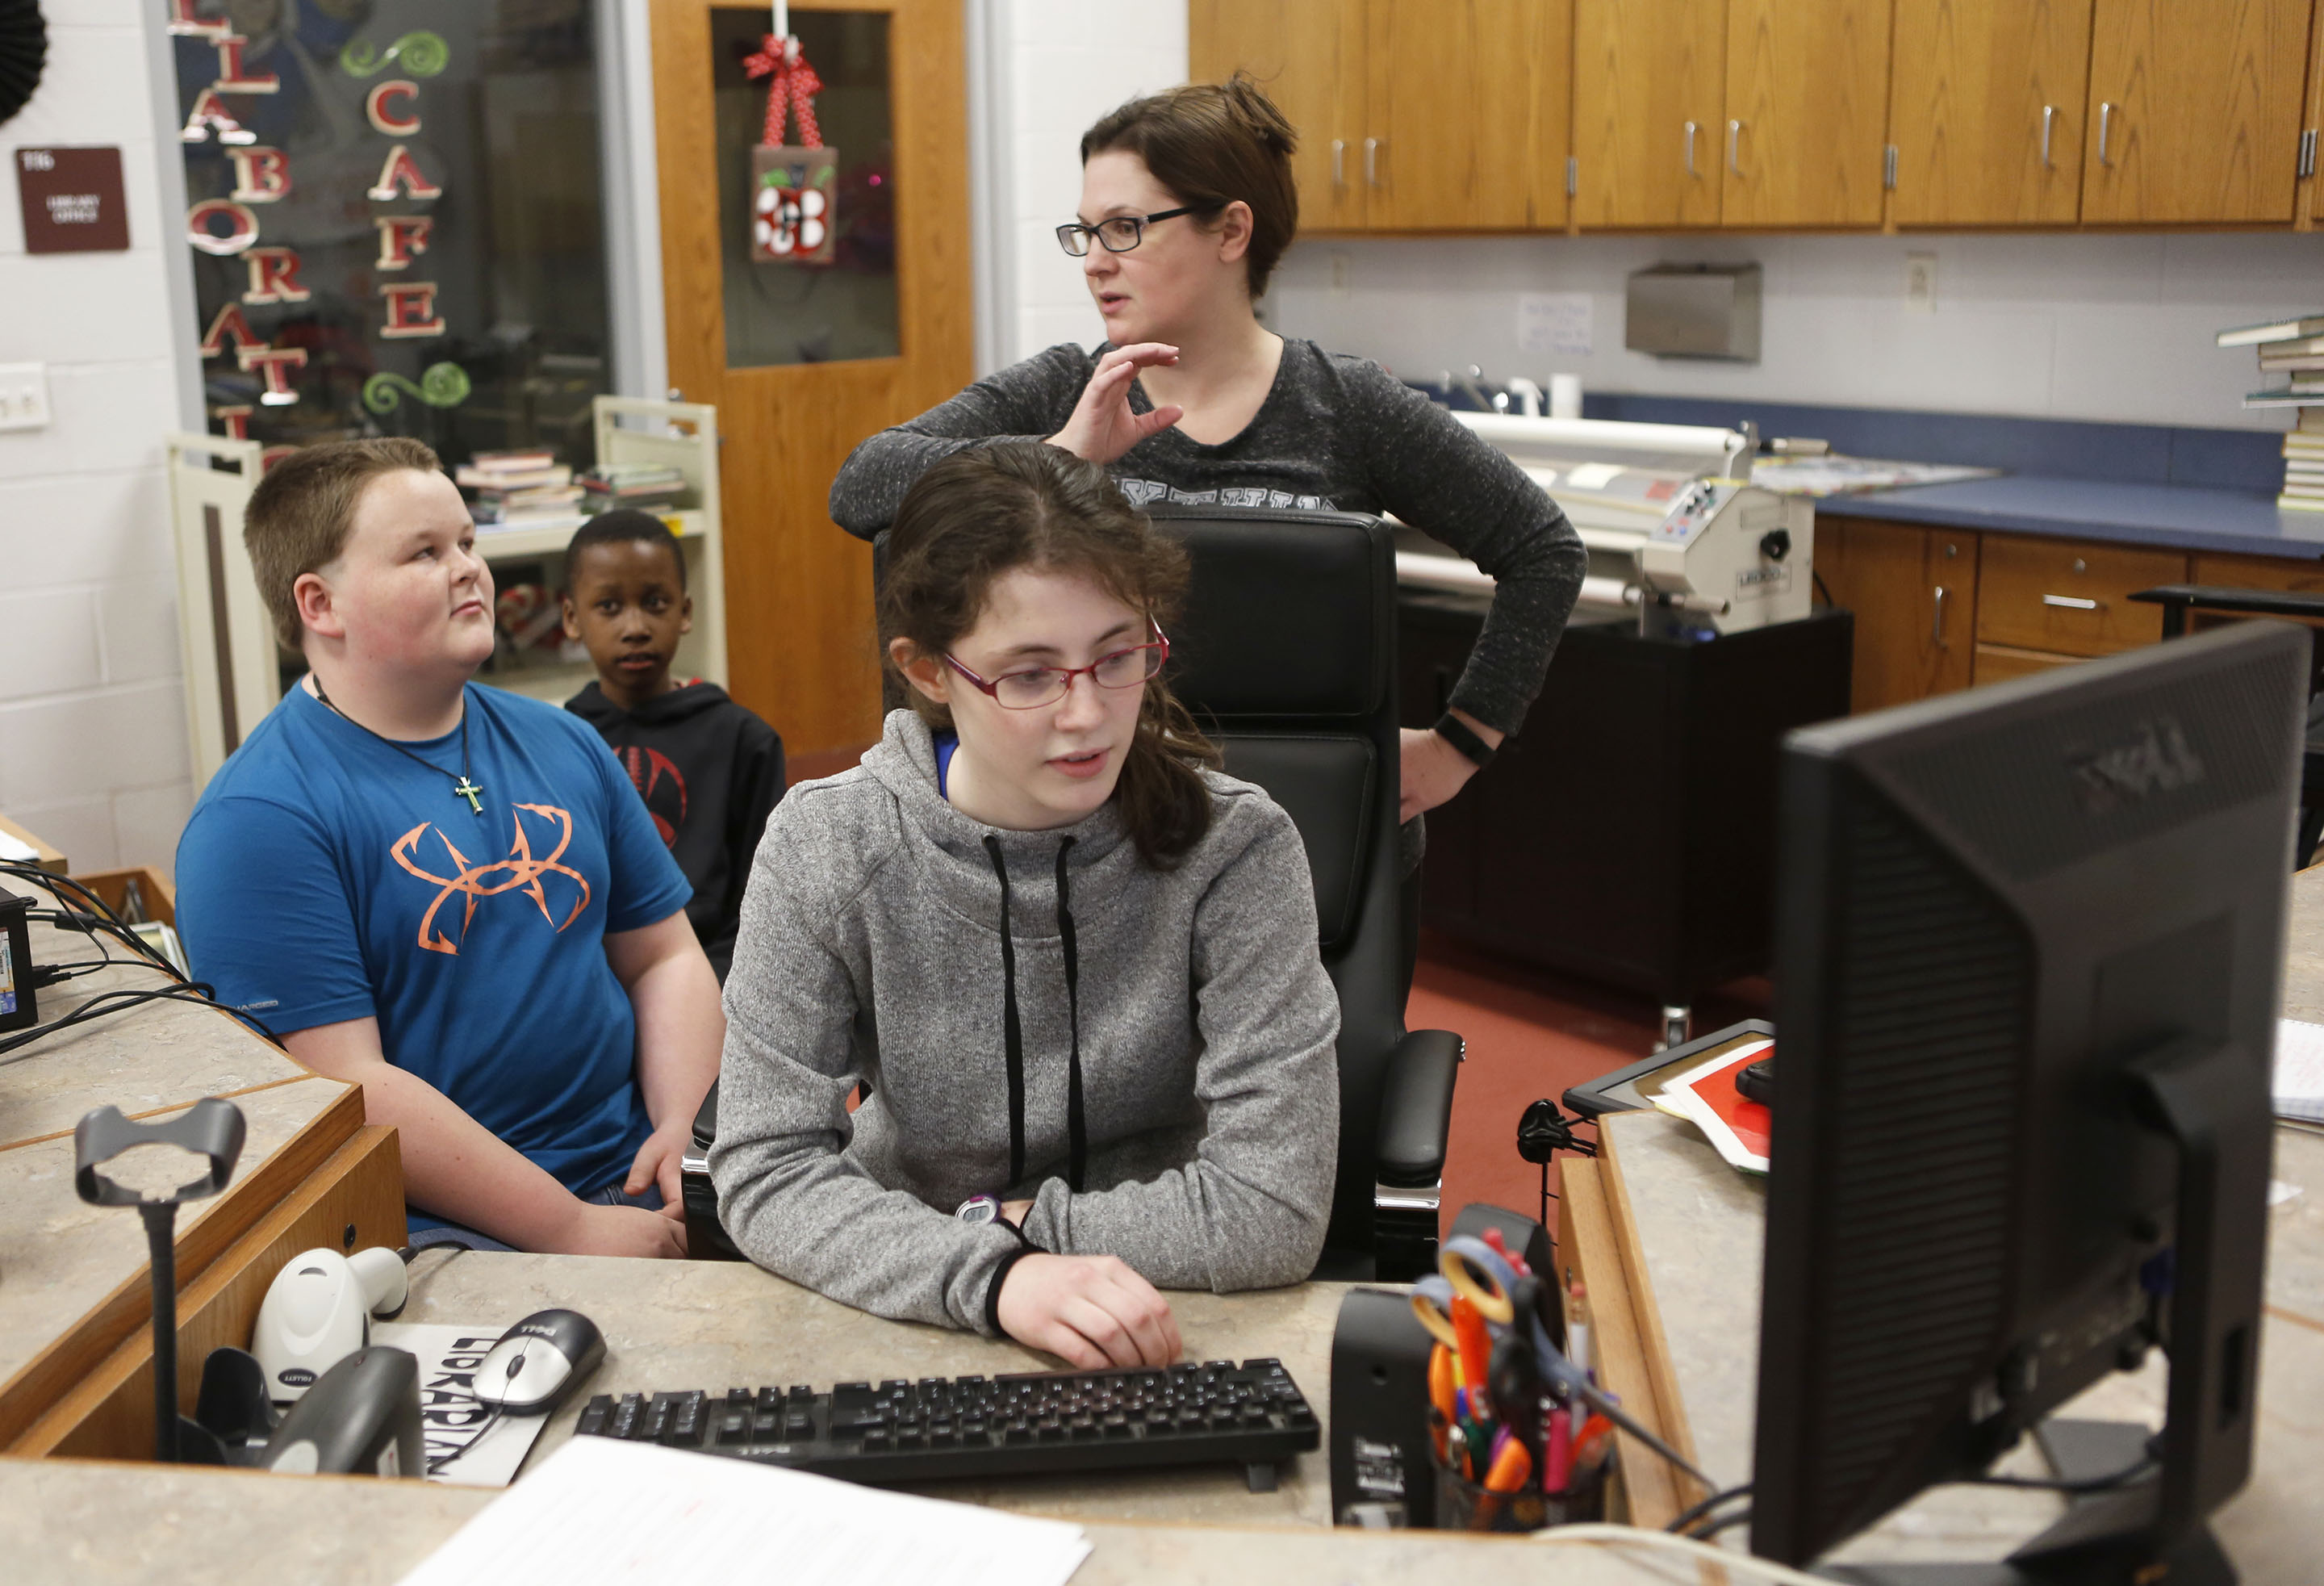 Librarian Jessica Holmes works with her students, from left, Jon Strange, Muhammed Cisse and Emily Rudic on the letter they will send to schools around the world that are participating in their culture connection project. Photo by Brenna Kelly, Feb. 8, 2016.